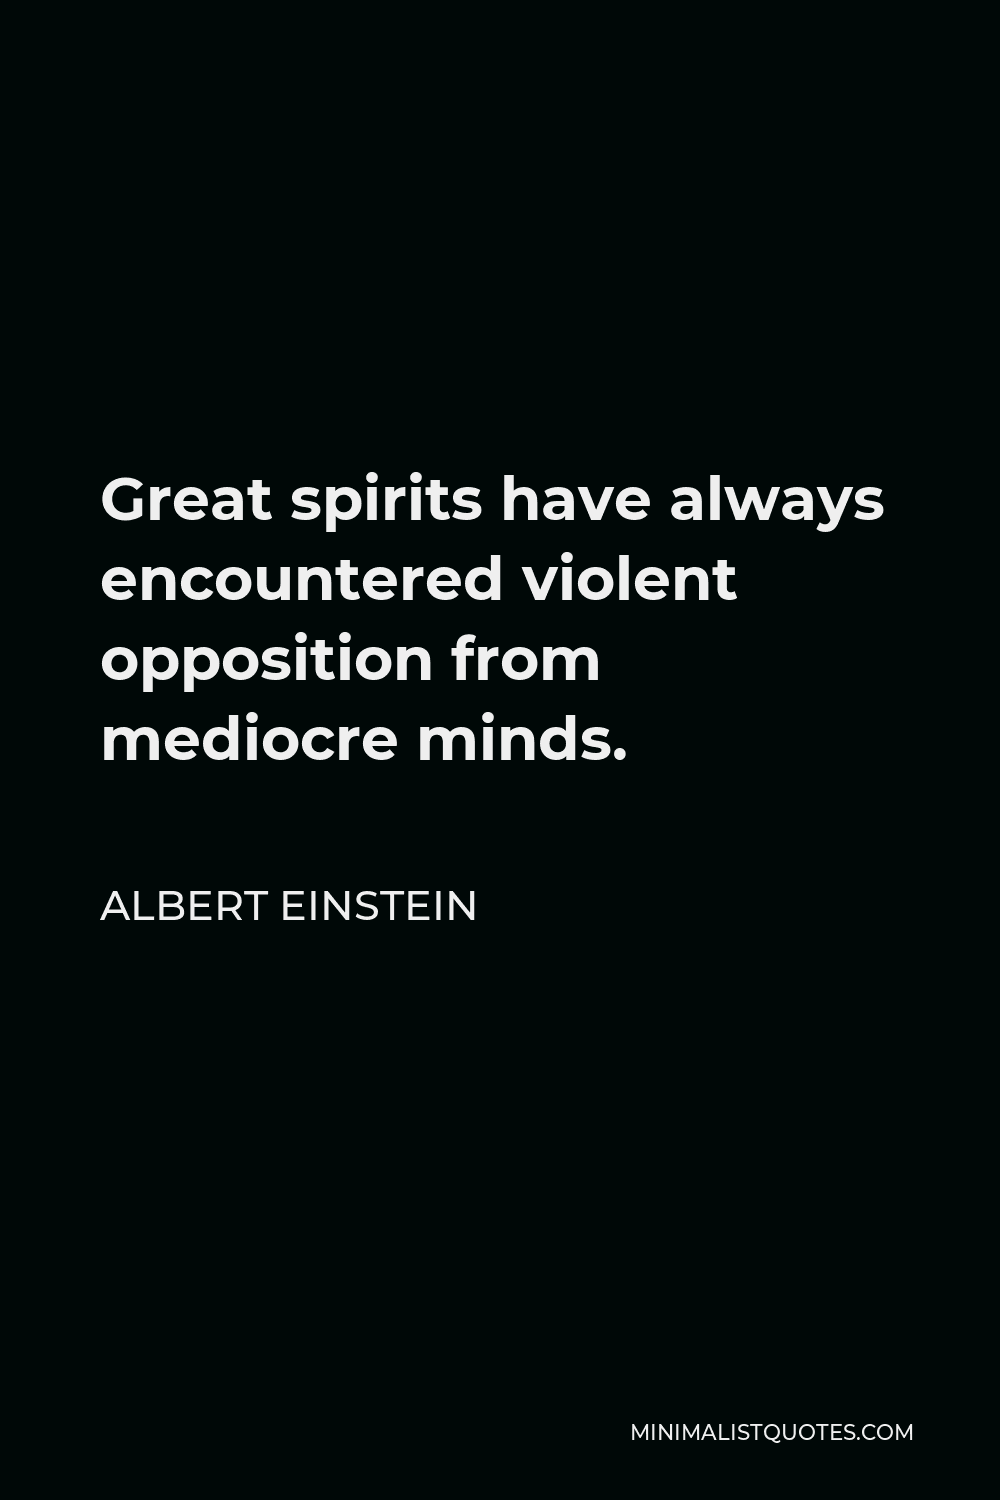 Albert Einstein Quote - Great spirits have always encountered violent opposition from mediocre minds.